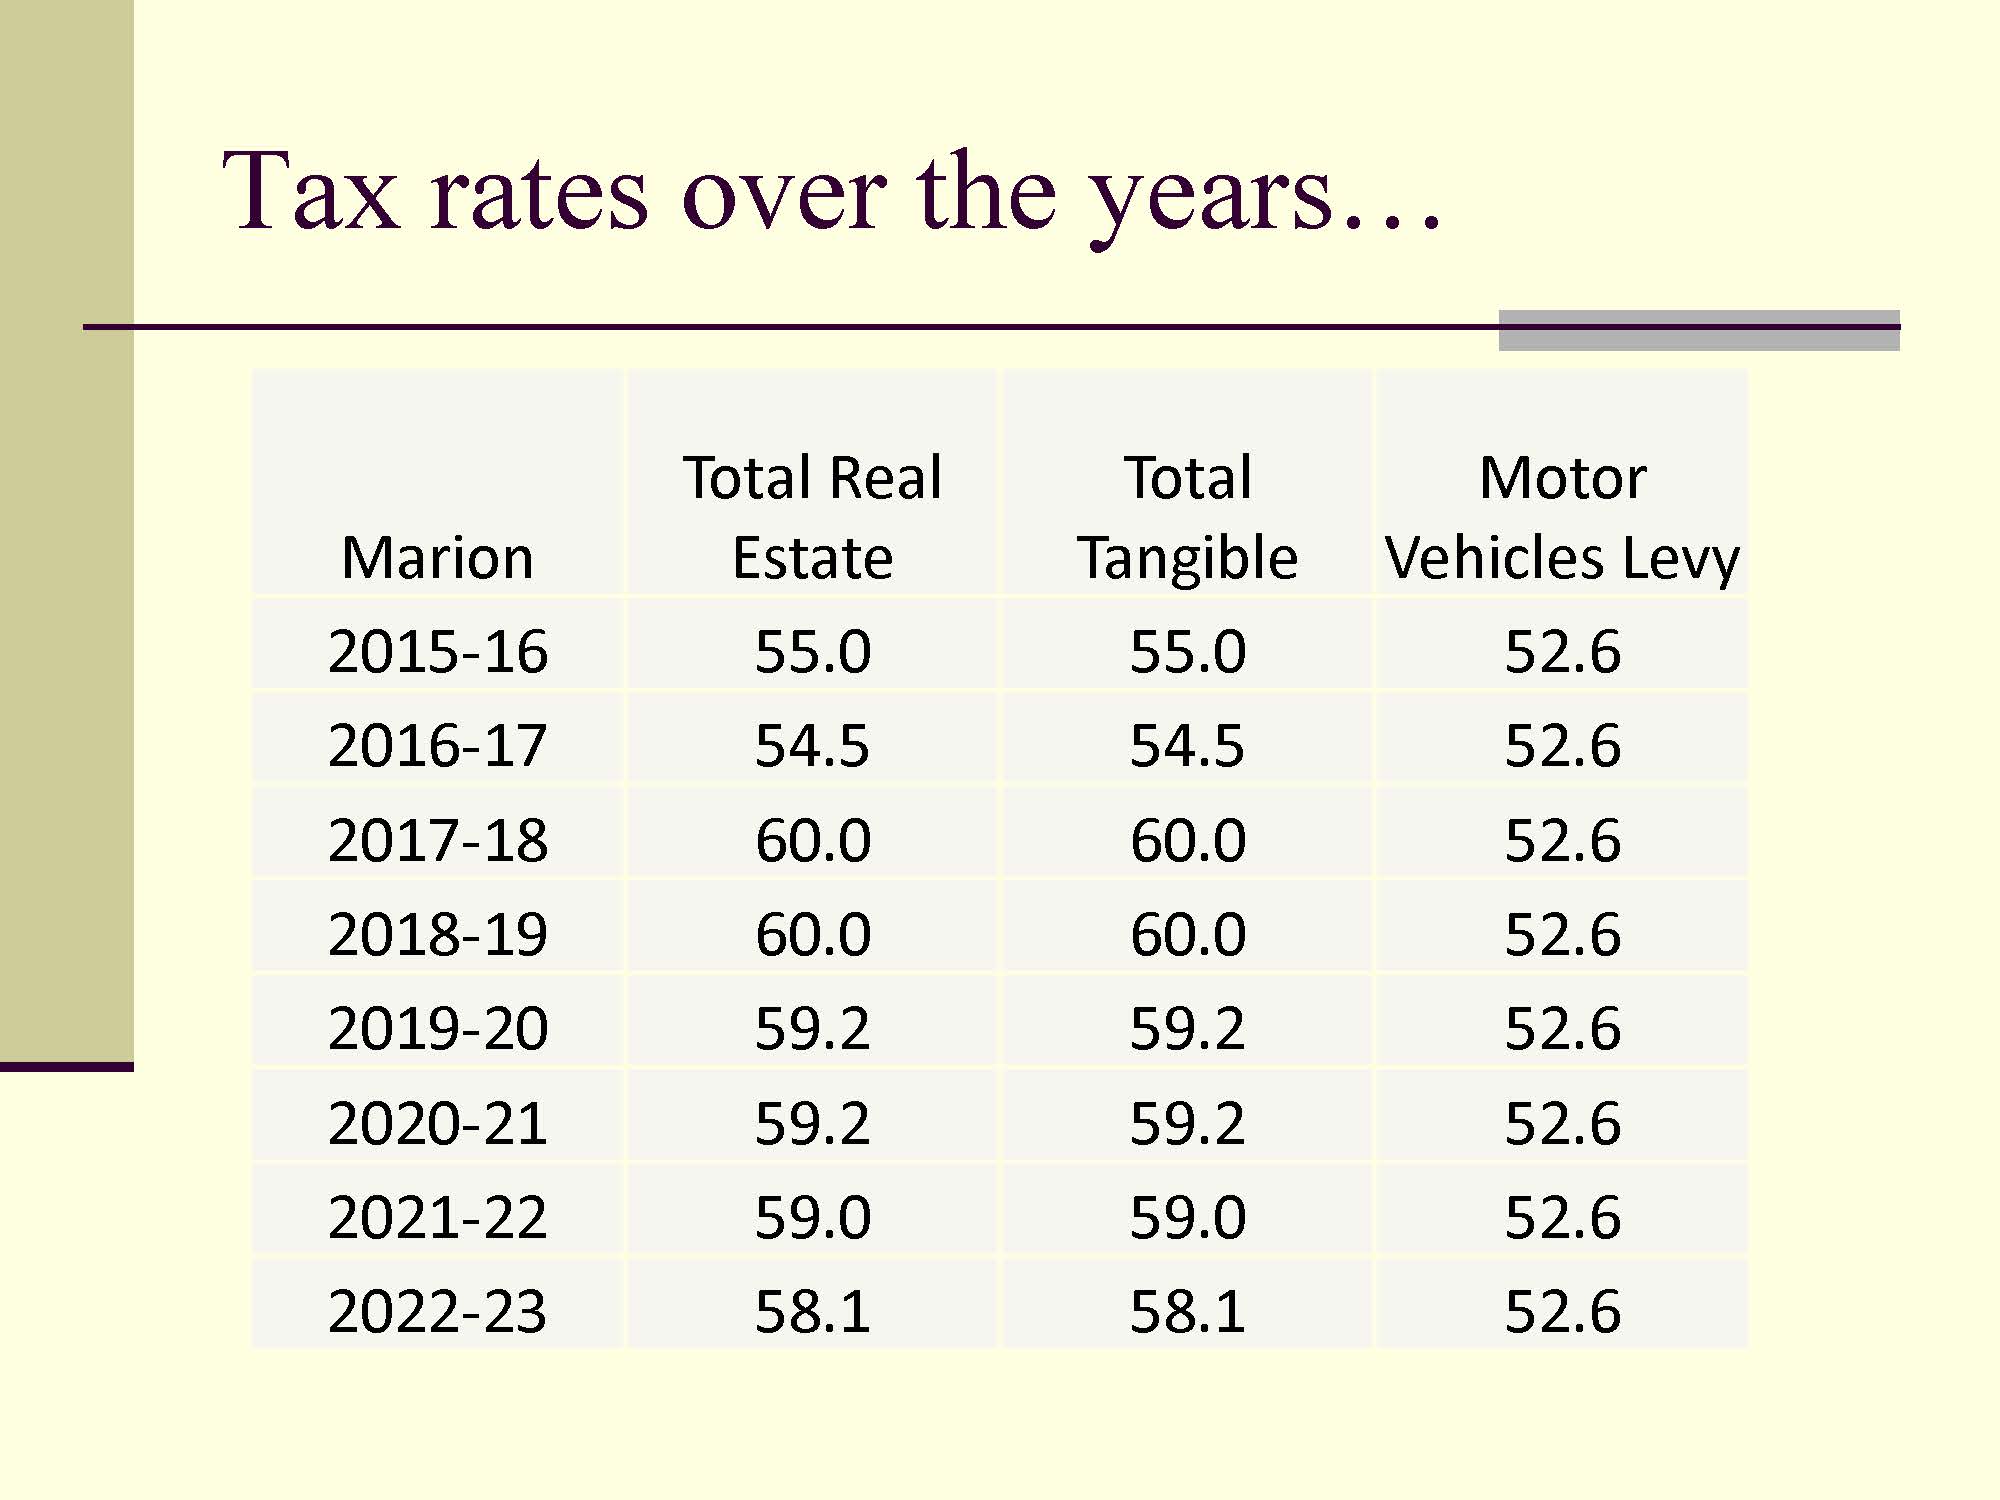 Tax rates over the years chart